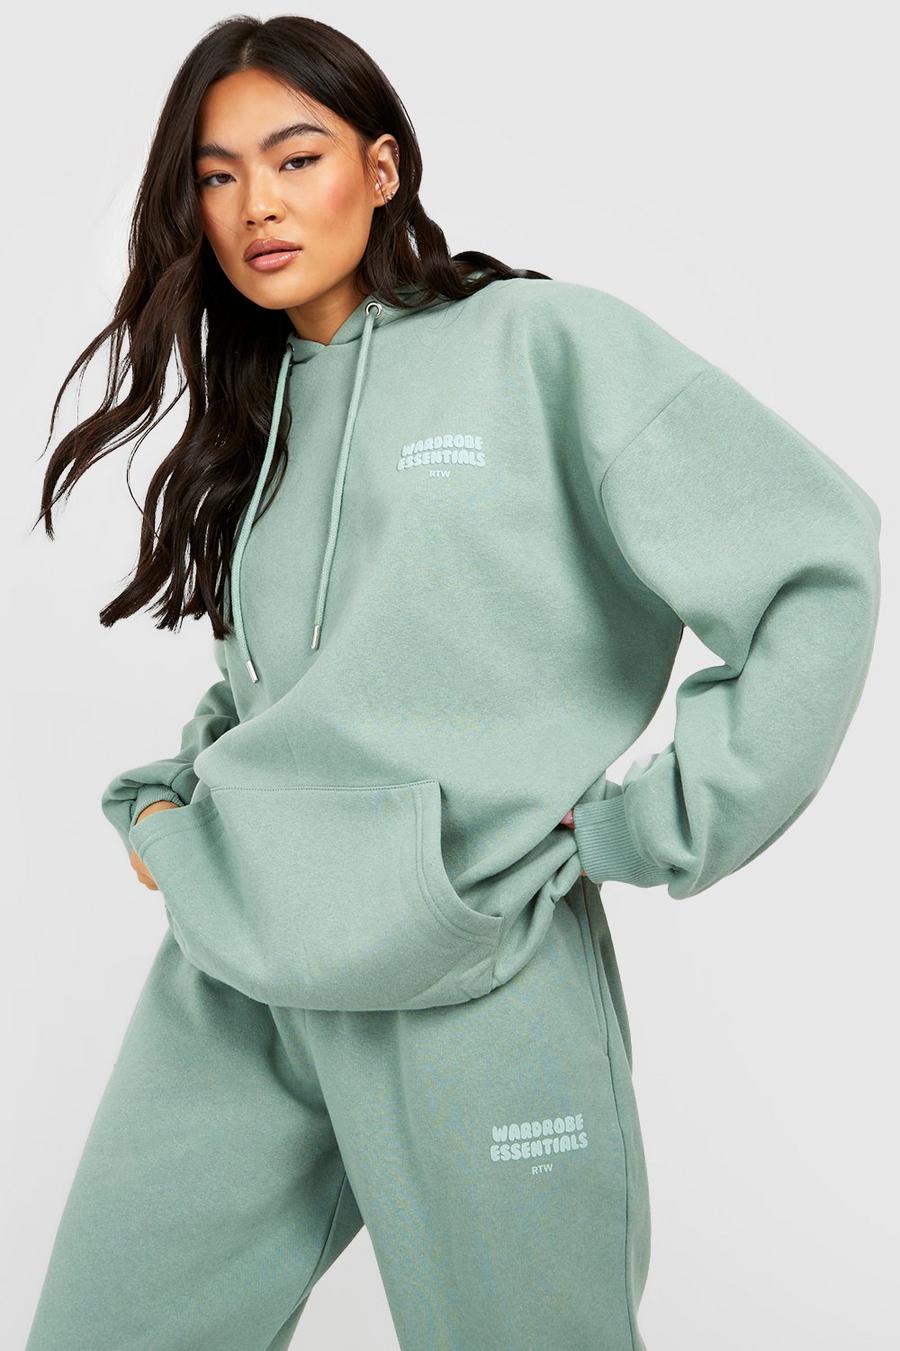 A comfy sweatshirt is a wardrobe staple and this green one from